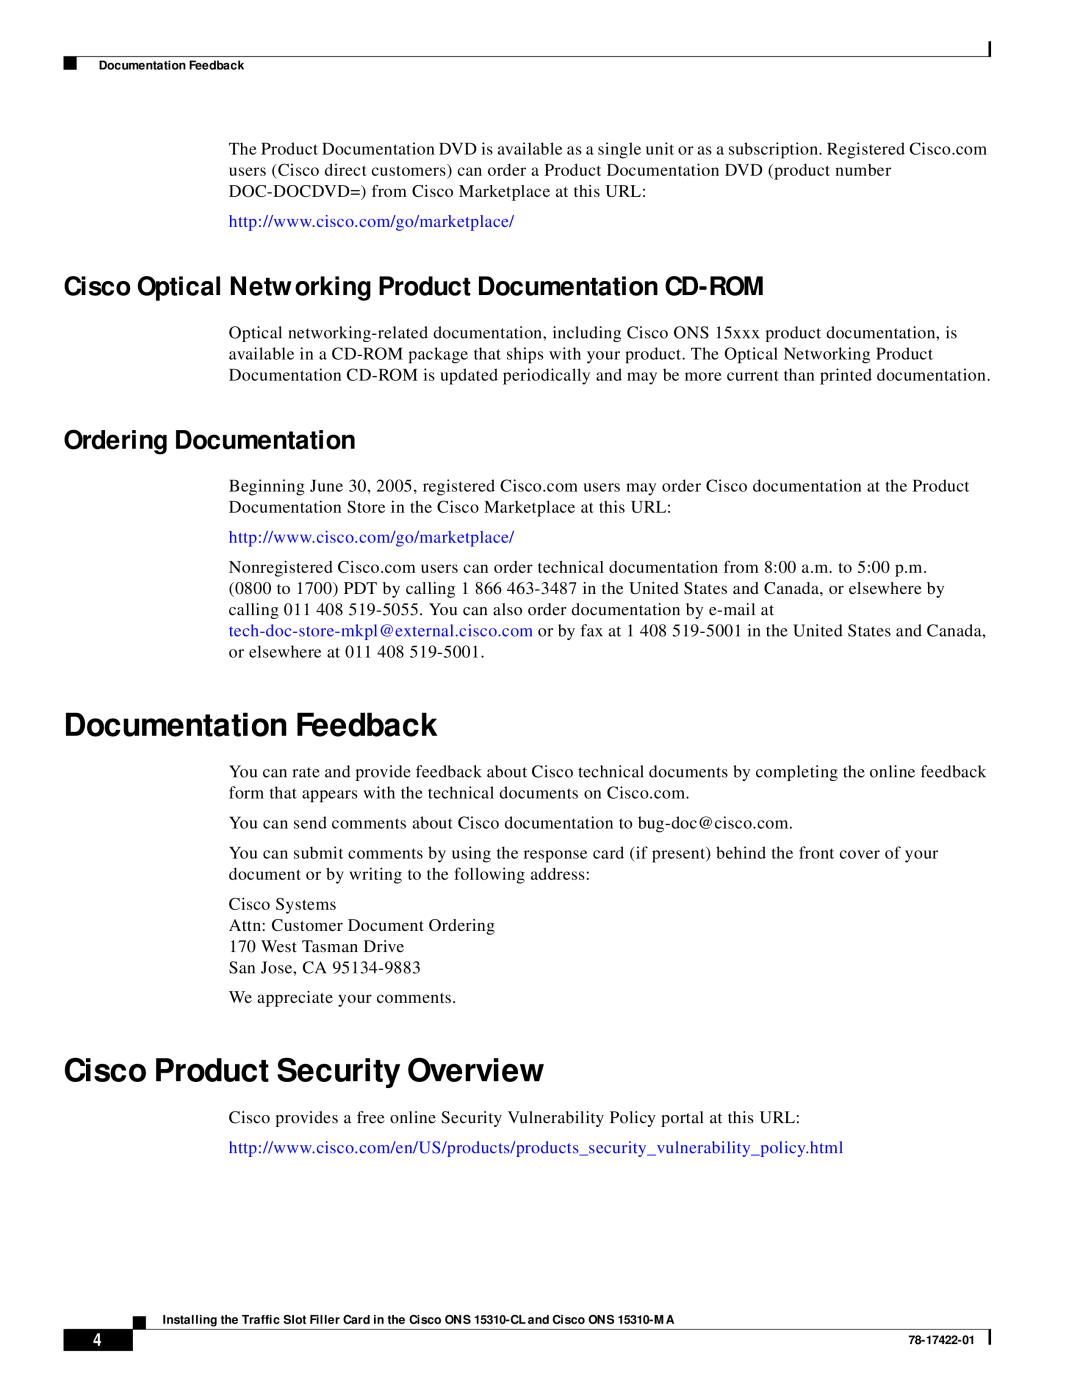 Cisco Systems 15310-MA, 15310-CL Documentation Feedback, Cisco Product Security Overview, Ordering Documentation 